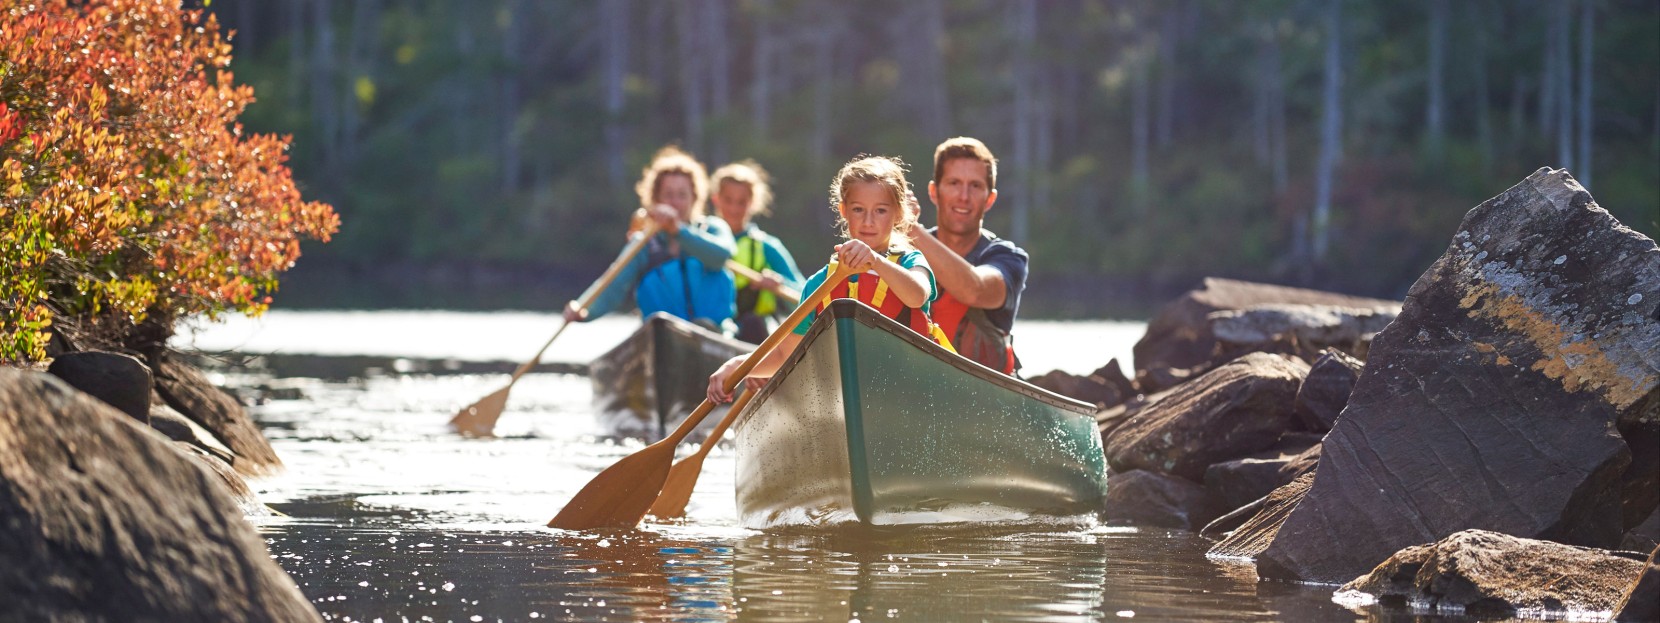 A family of 4 in 2 canoes paddles toward the camera.